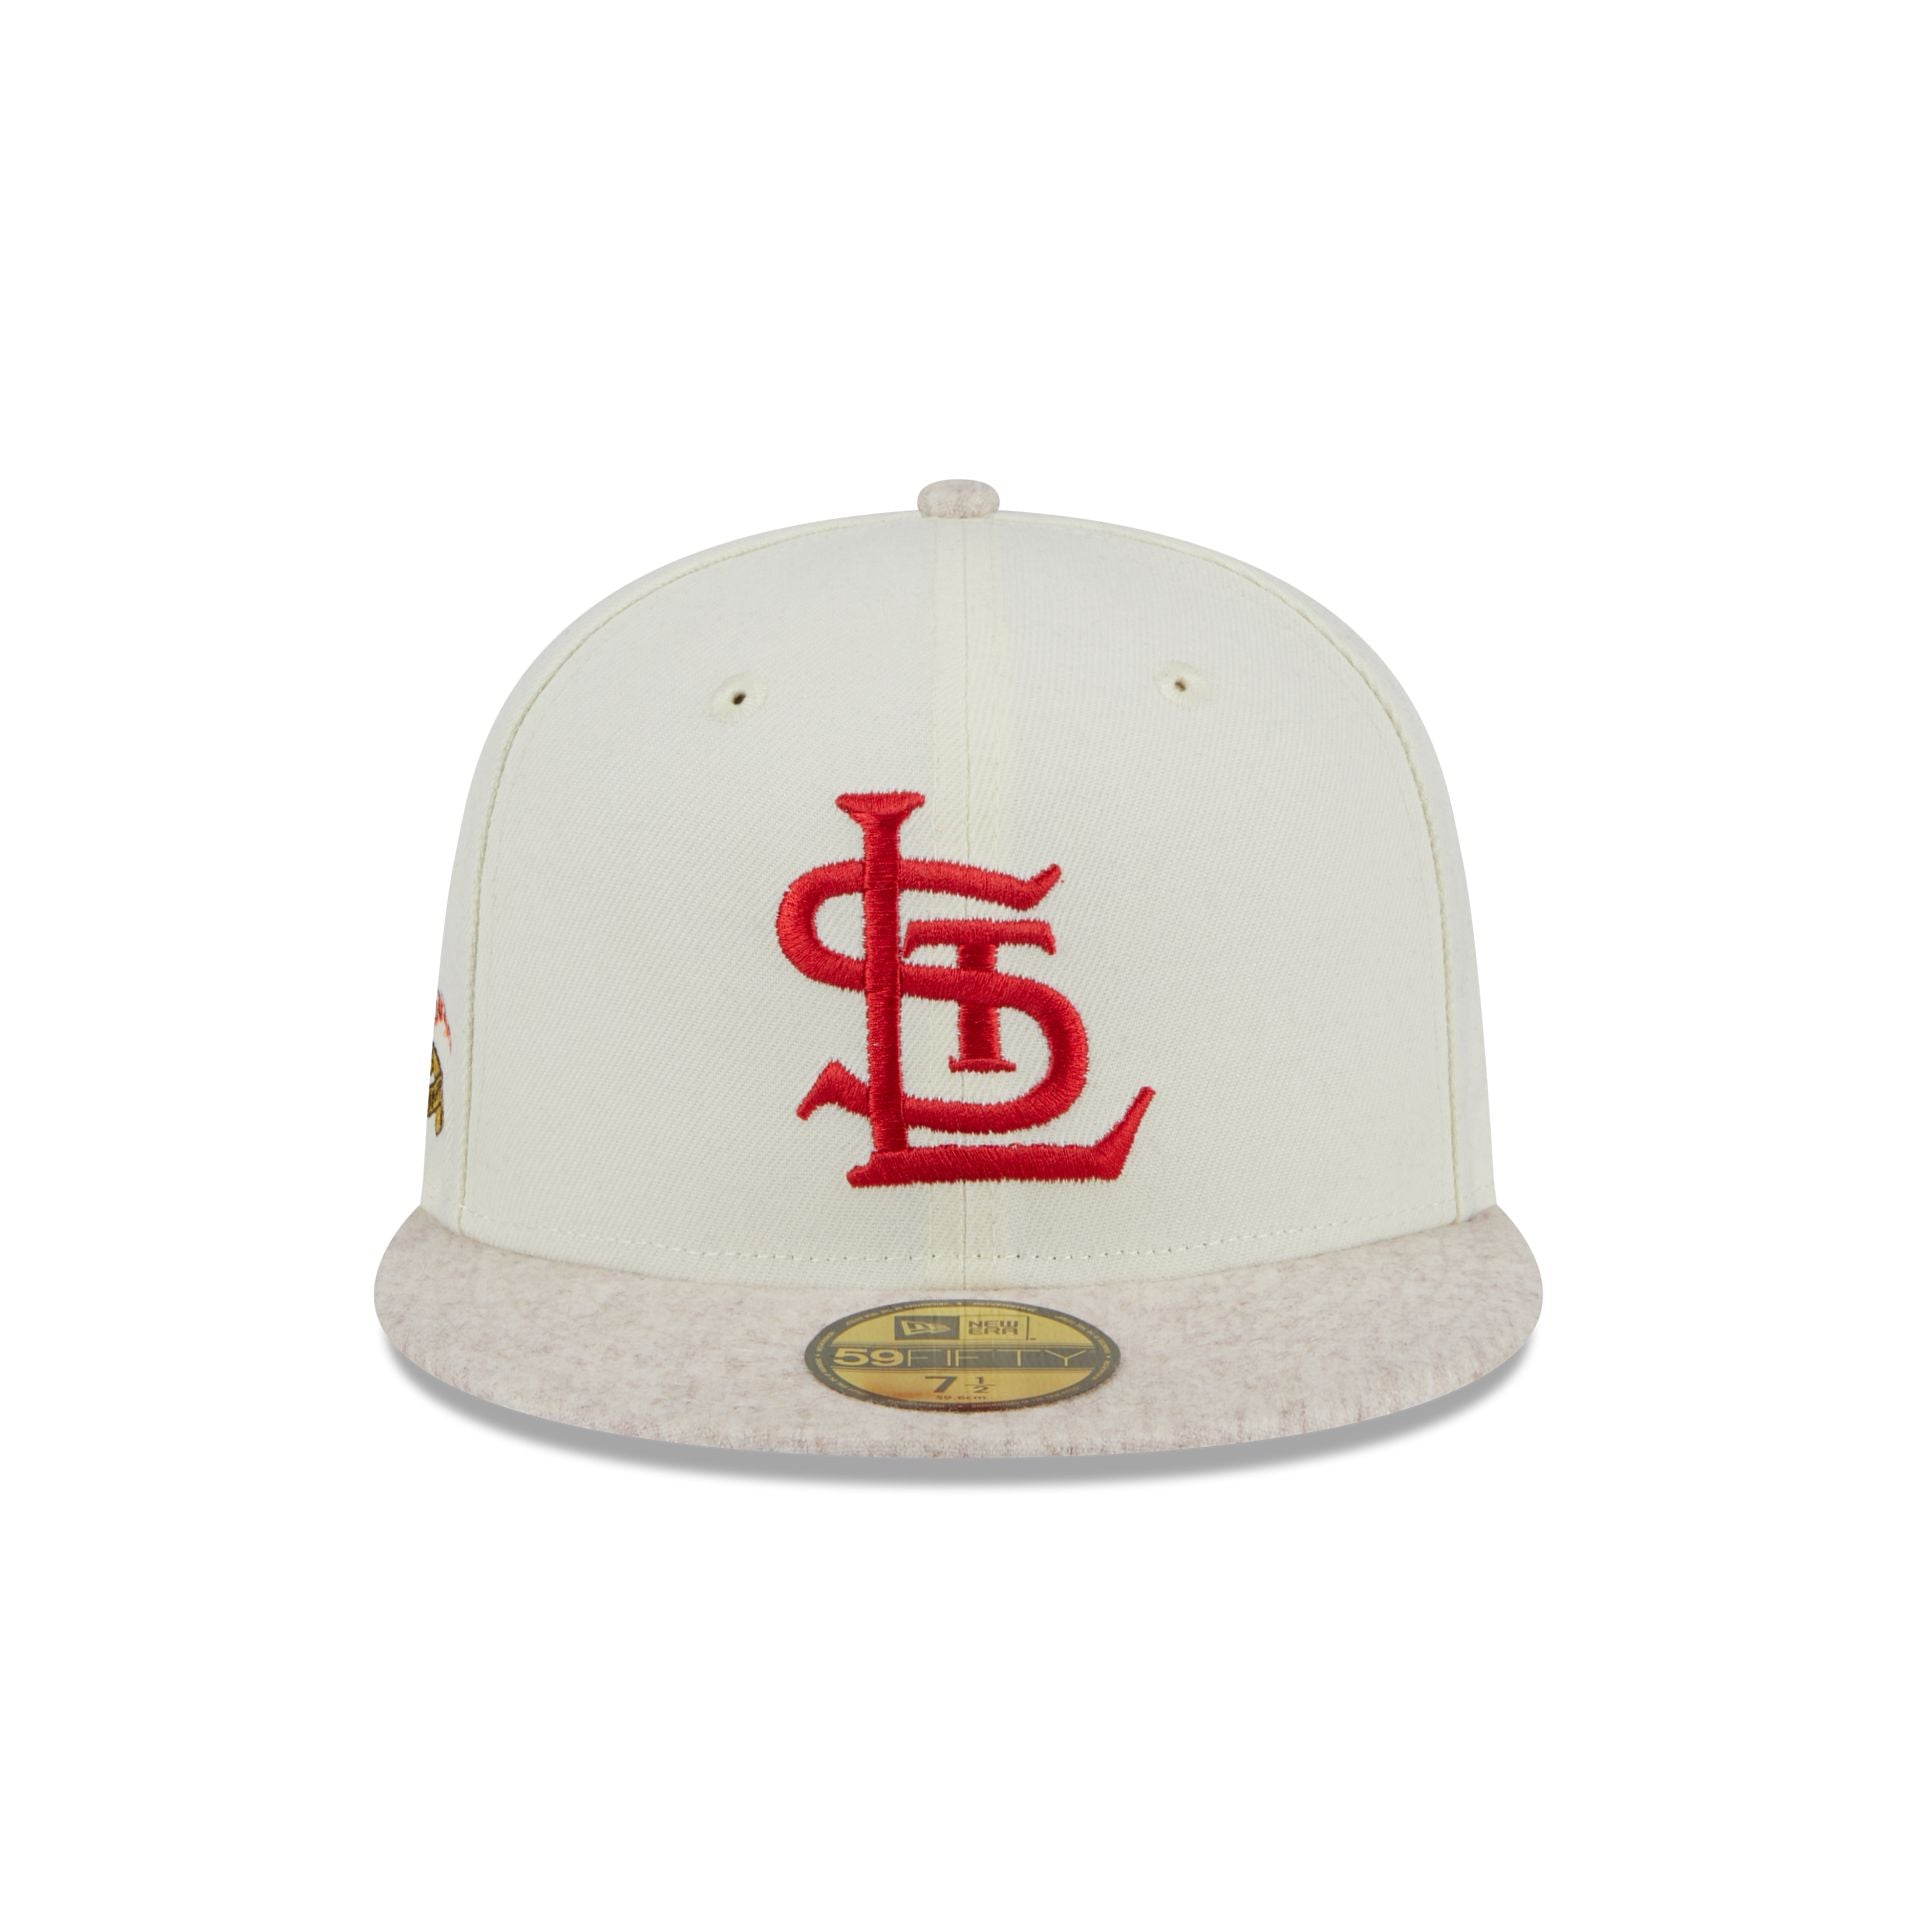 St. Louis Cardinals Retro Jersey Script 59FIFTY Fitted Hat, Gray - Size: 7 5/8, MLB by New Era